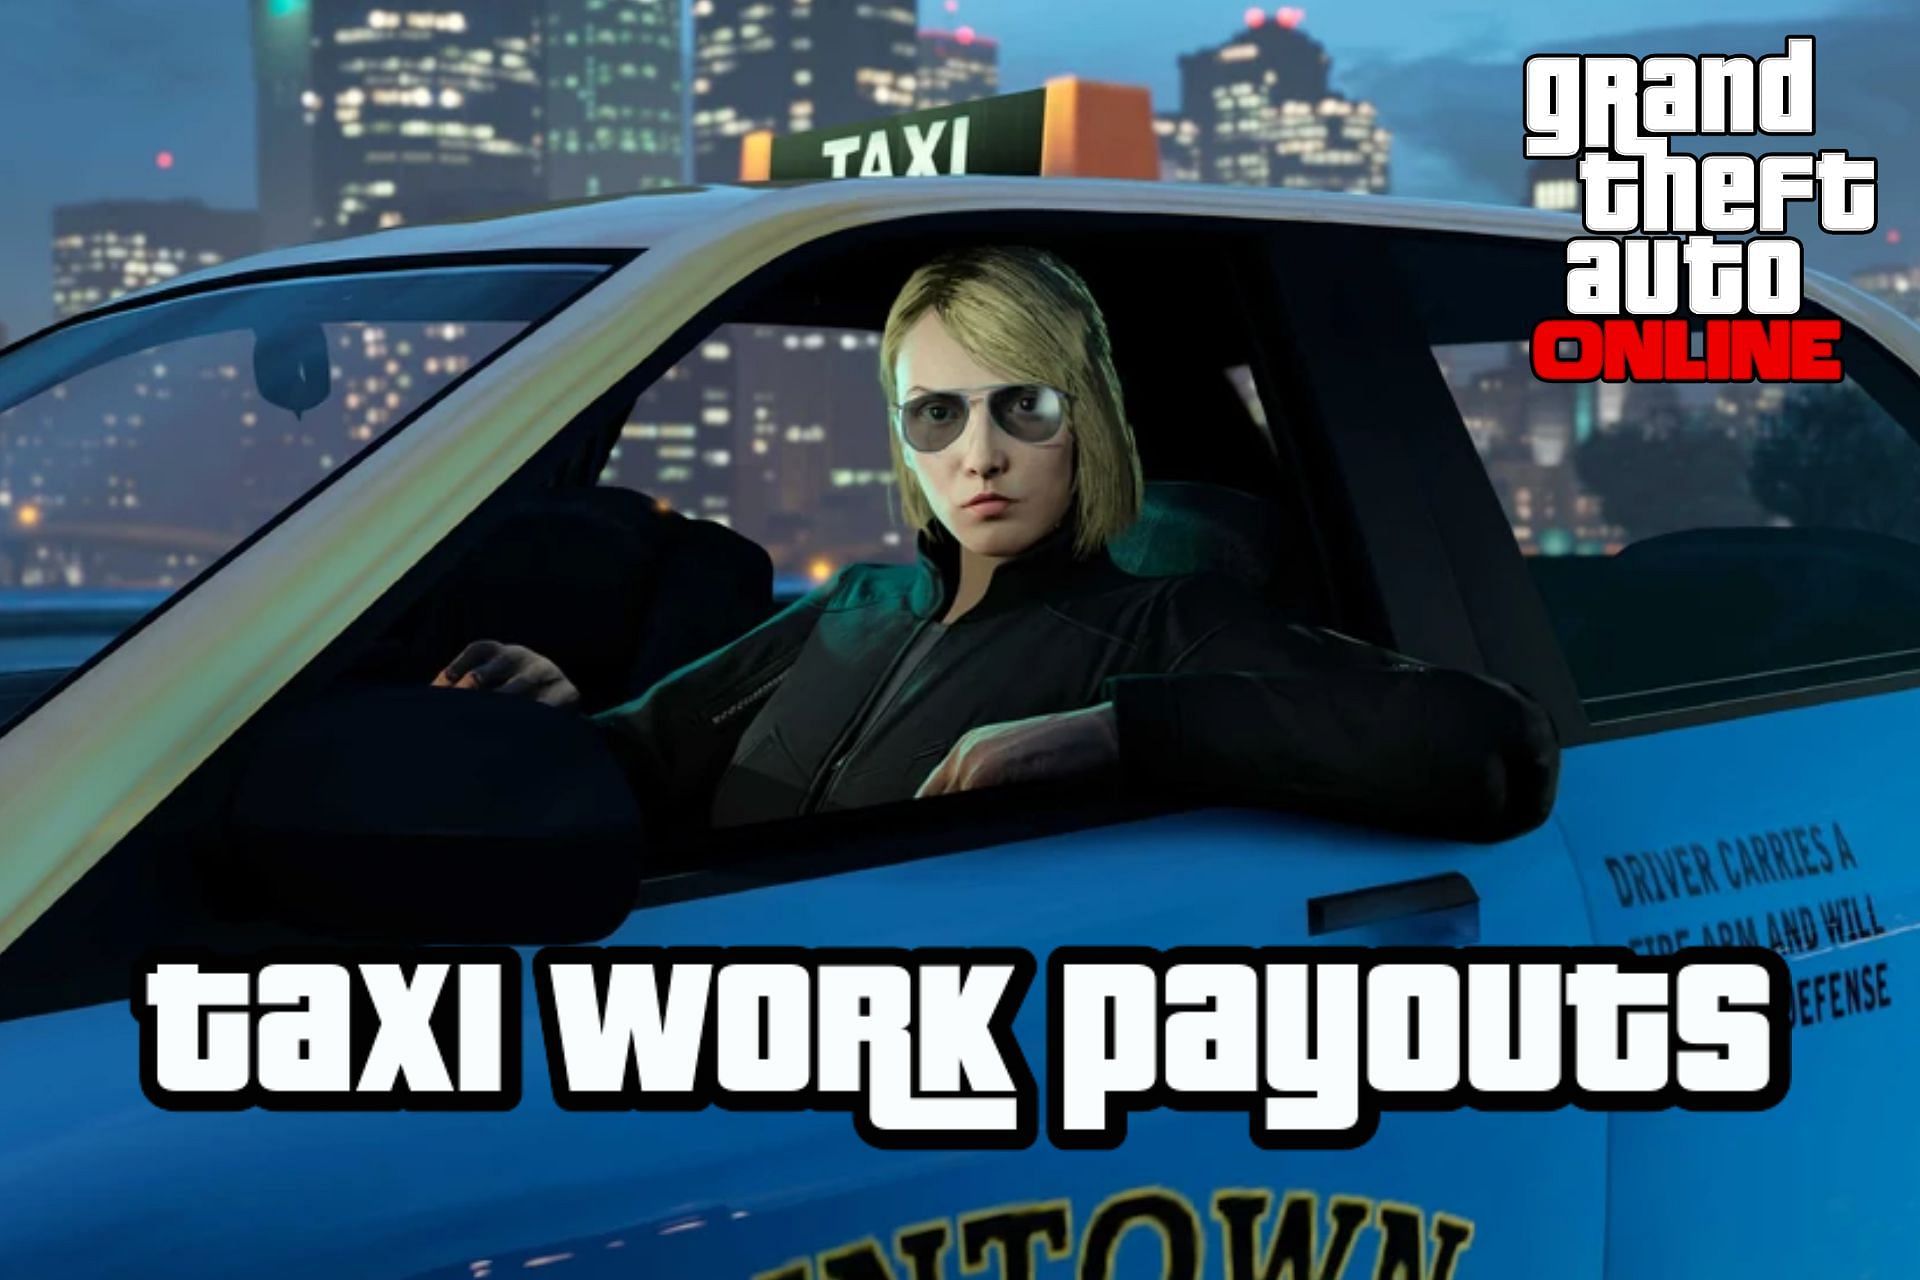 The Taxi Work missions are a new way to earn money in GTA Online (Image via Rockstar Games)